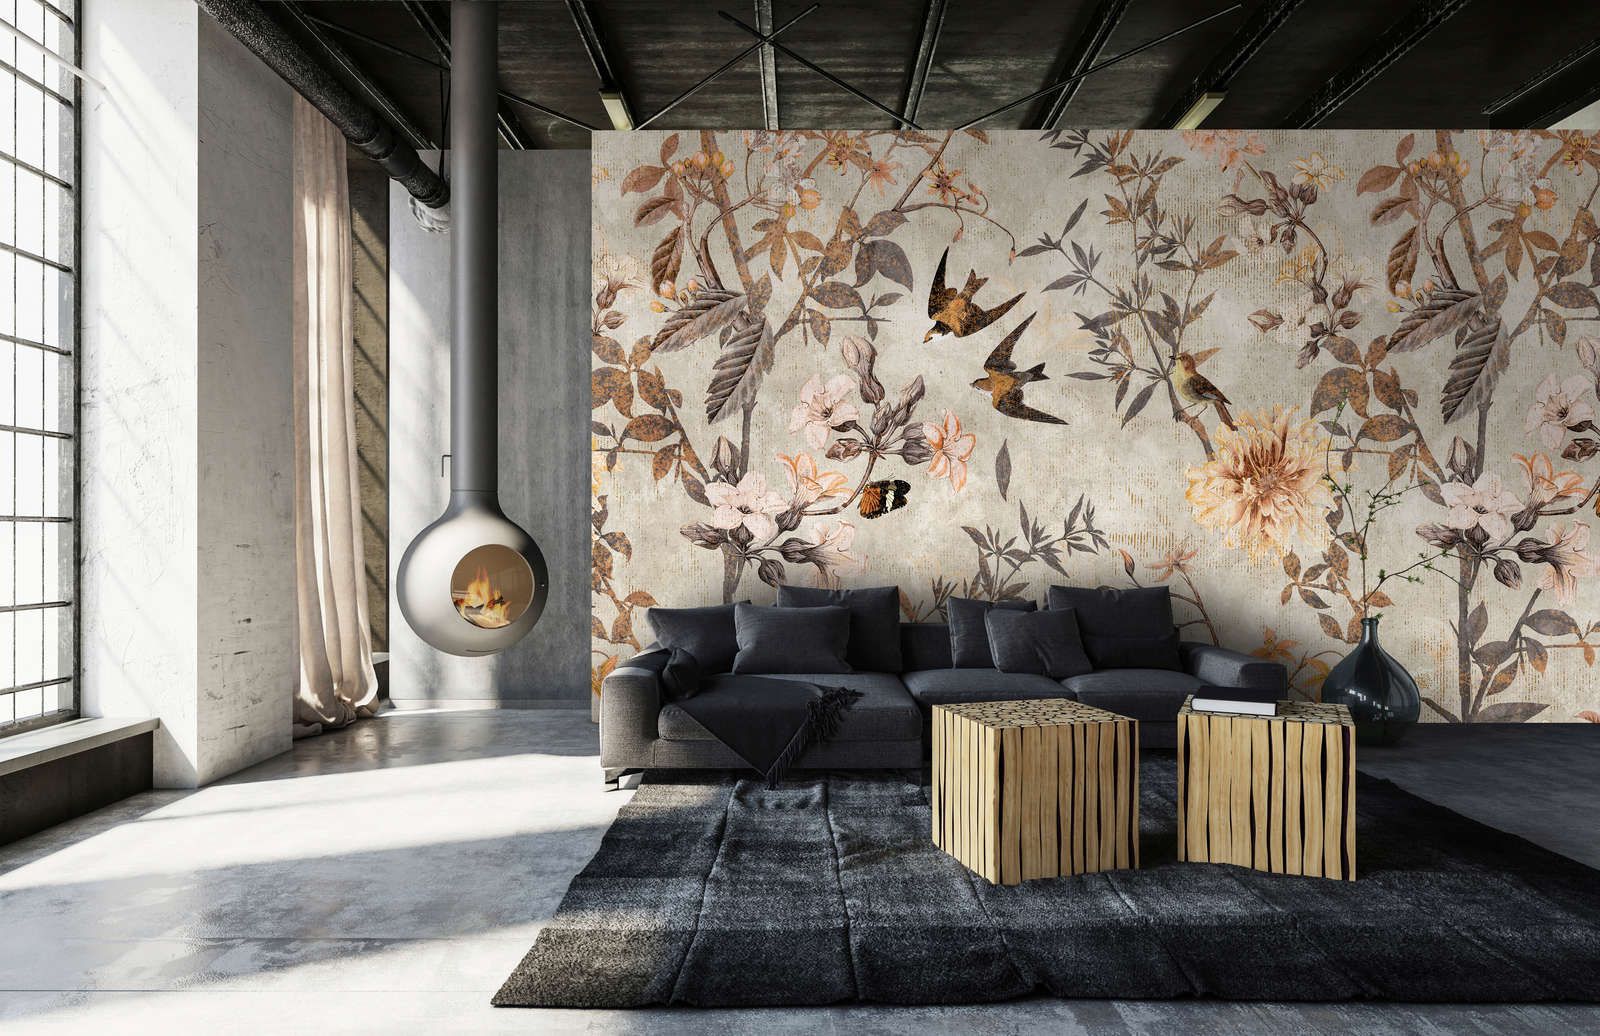             Photo wallpaper »eden« - Vintage style birds & flowers - Smooth, slightly pearlescent non-woven fabric
        